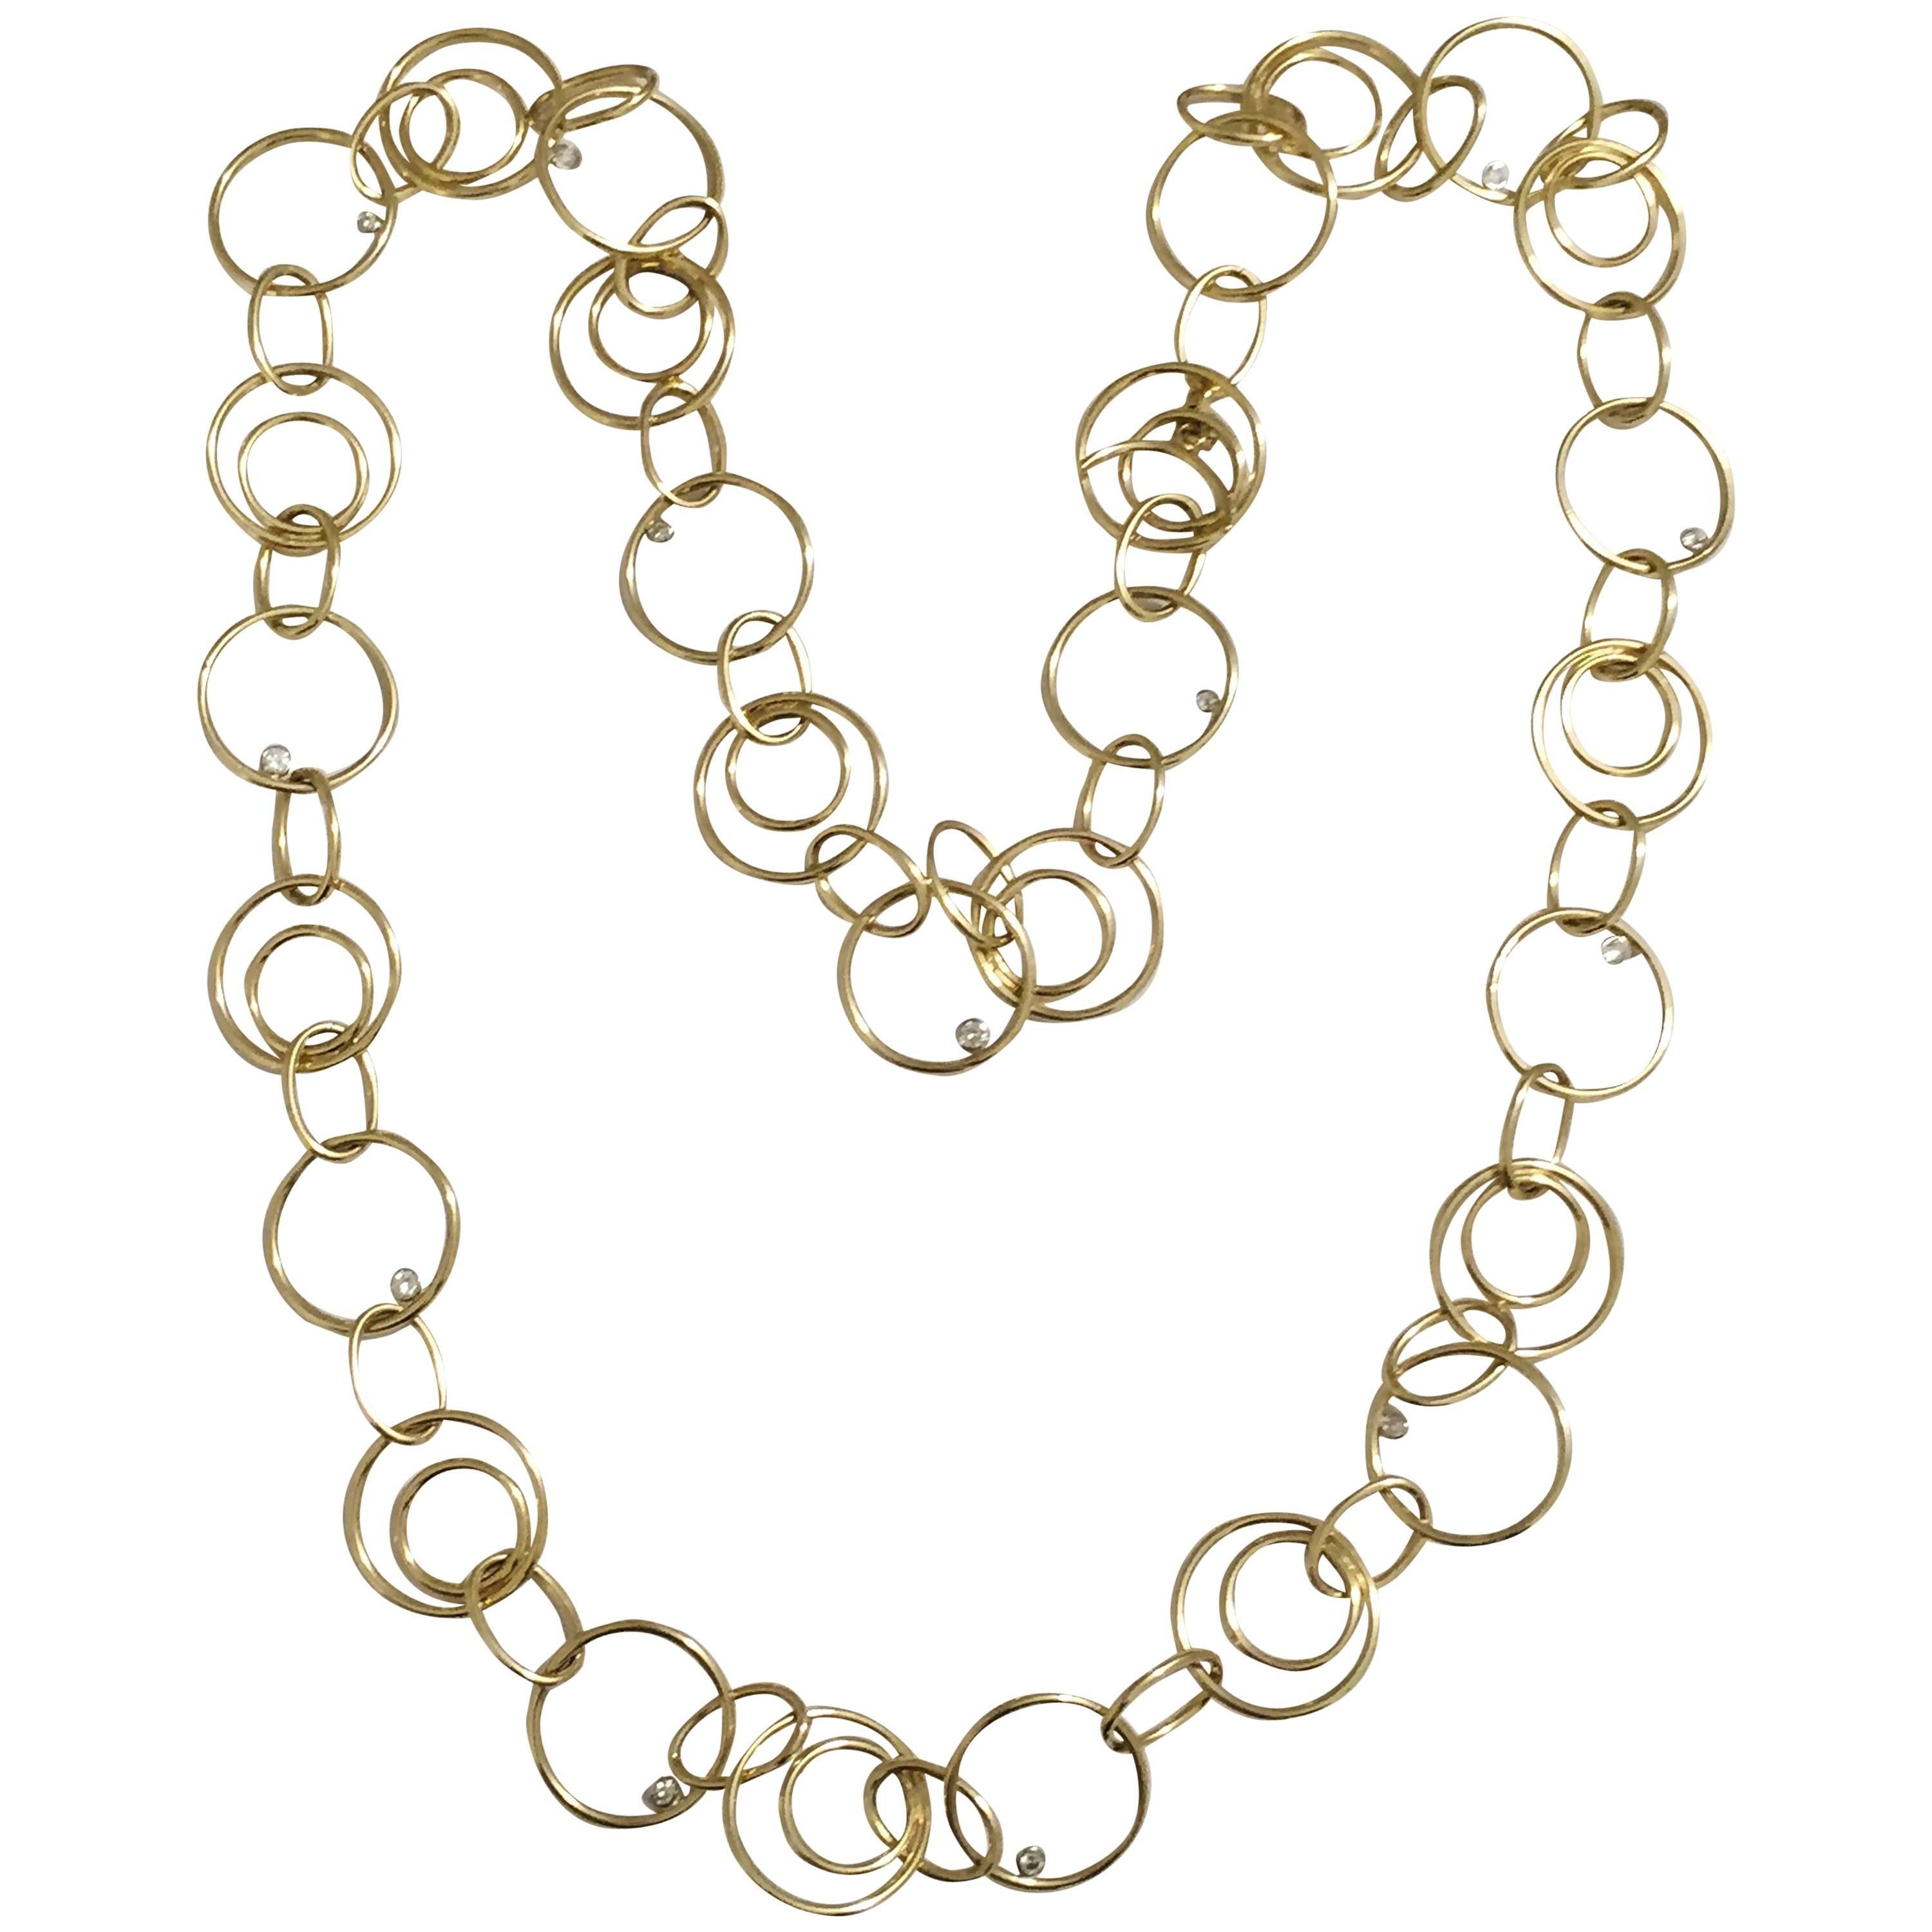  Yellow Gold Circles and floating diamond Chain Necklace For Sale